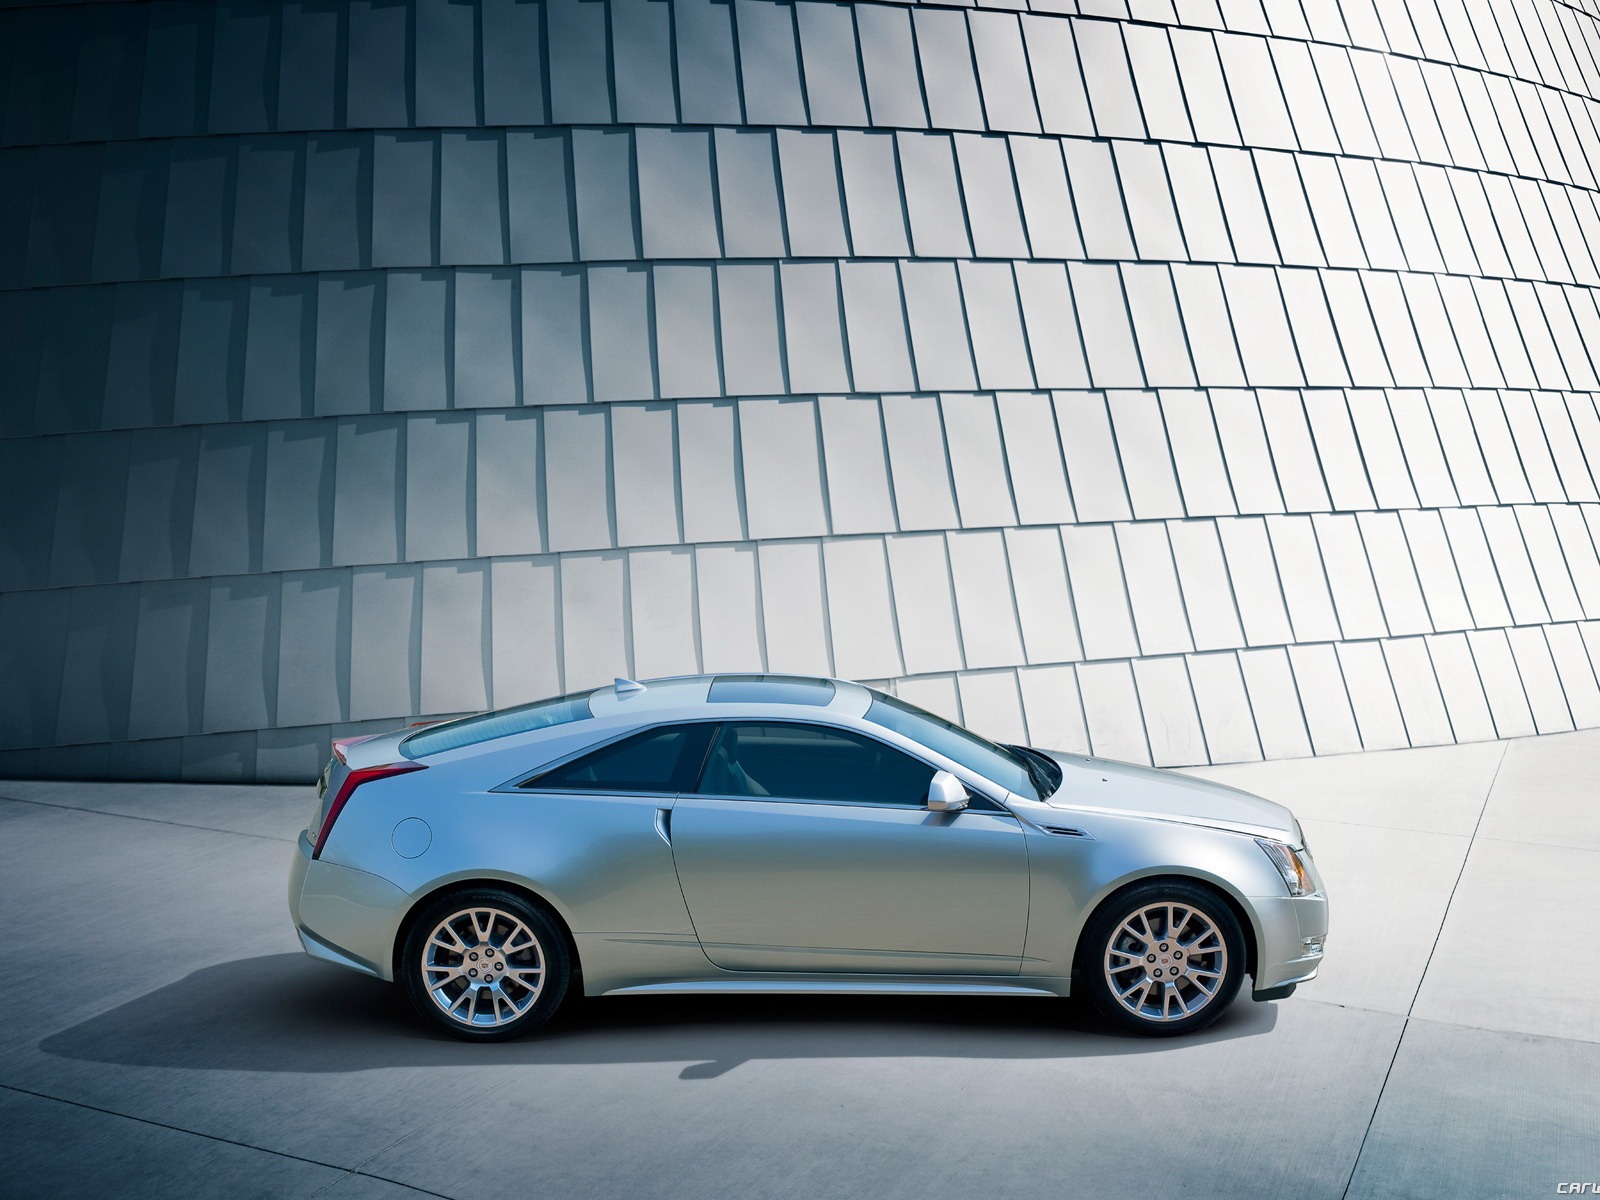 Cadillac CTS Coupe - 2011 HD Wallpaper #2 - 1600x1200